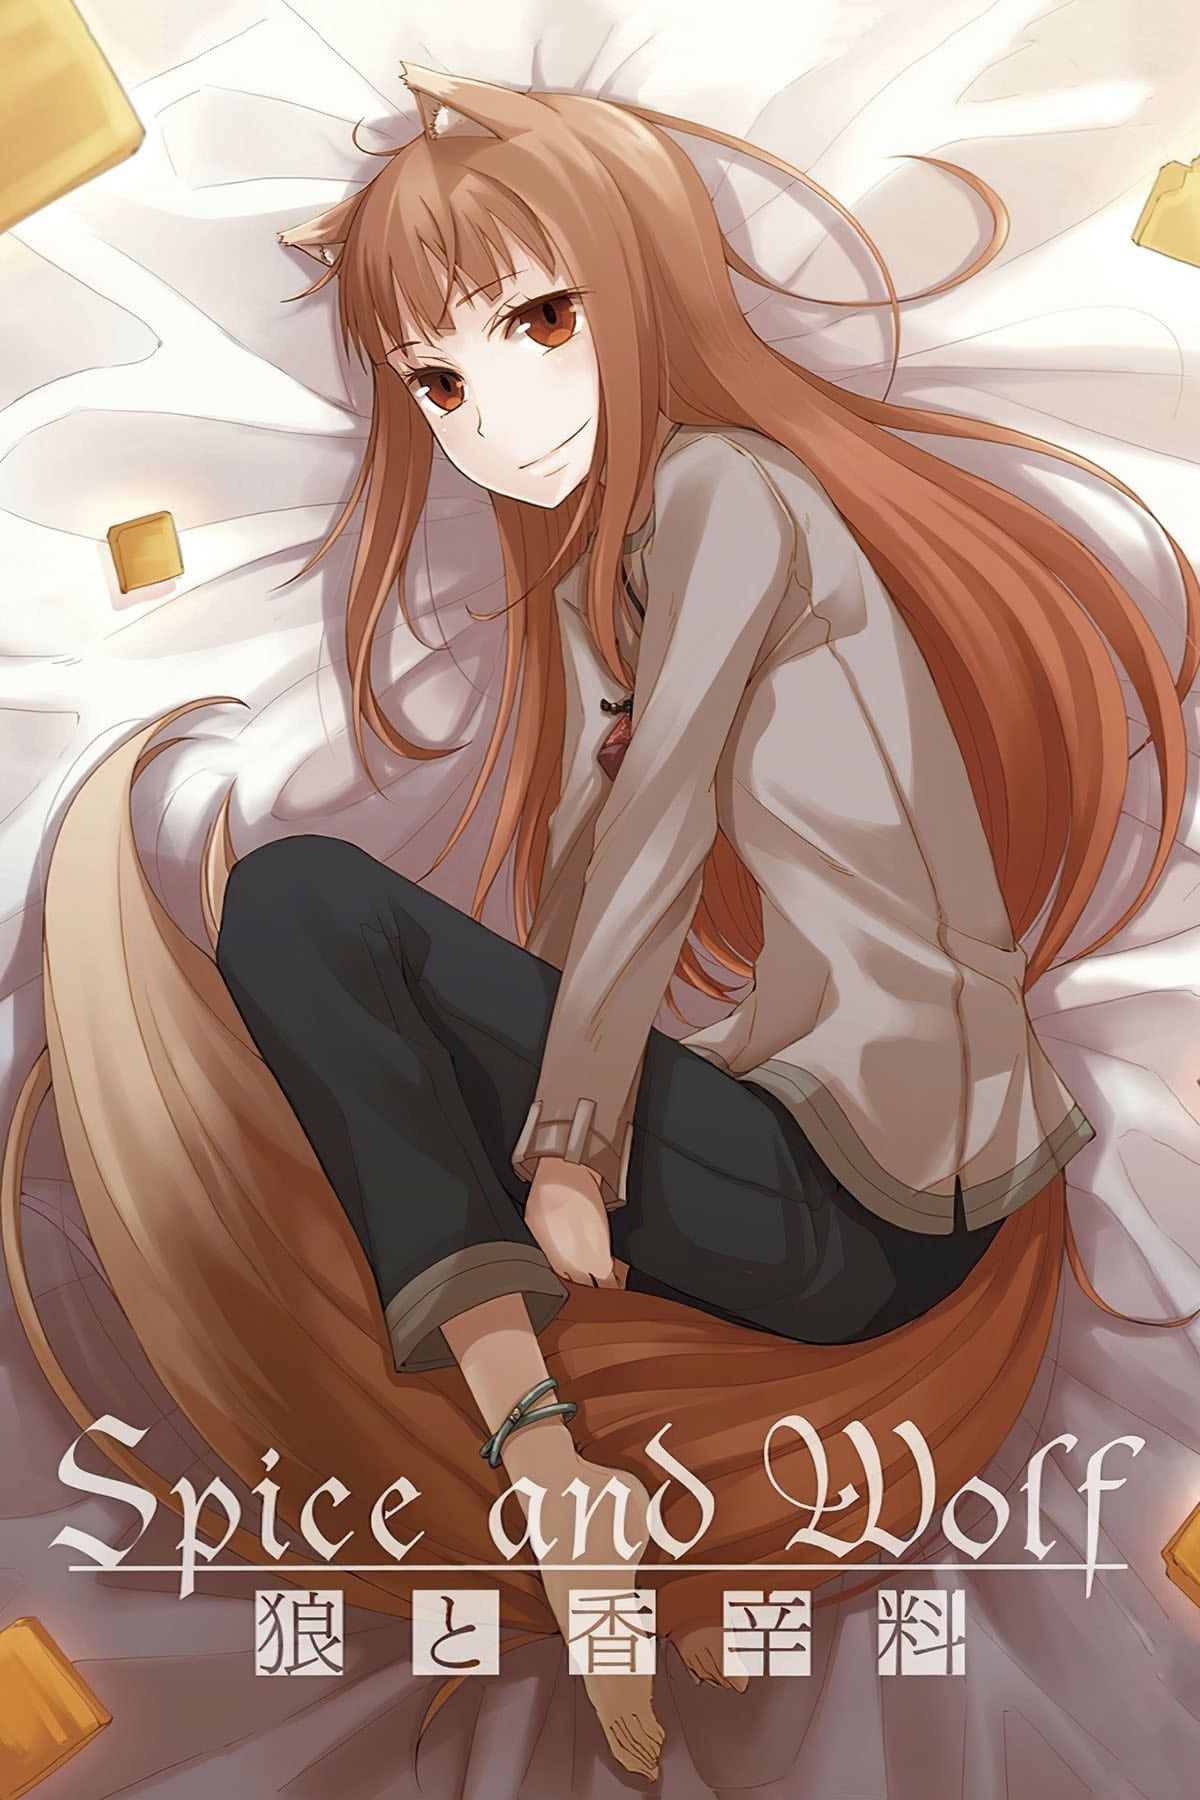 Spice and Wolf (Dub) (TV) The Best Manga